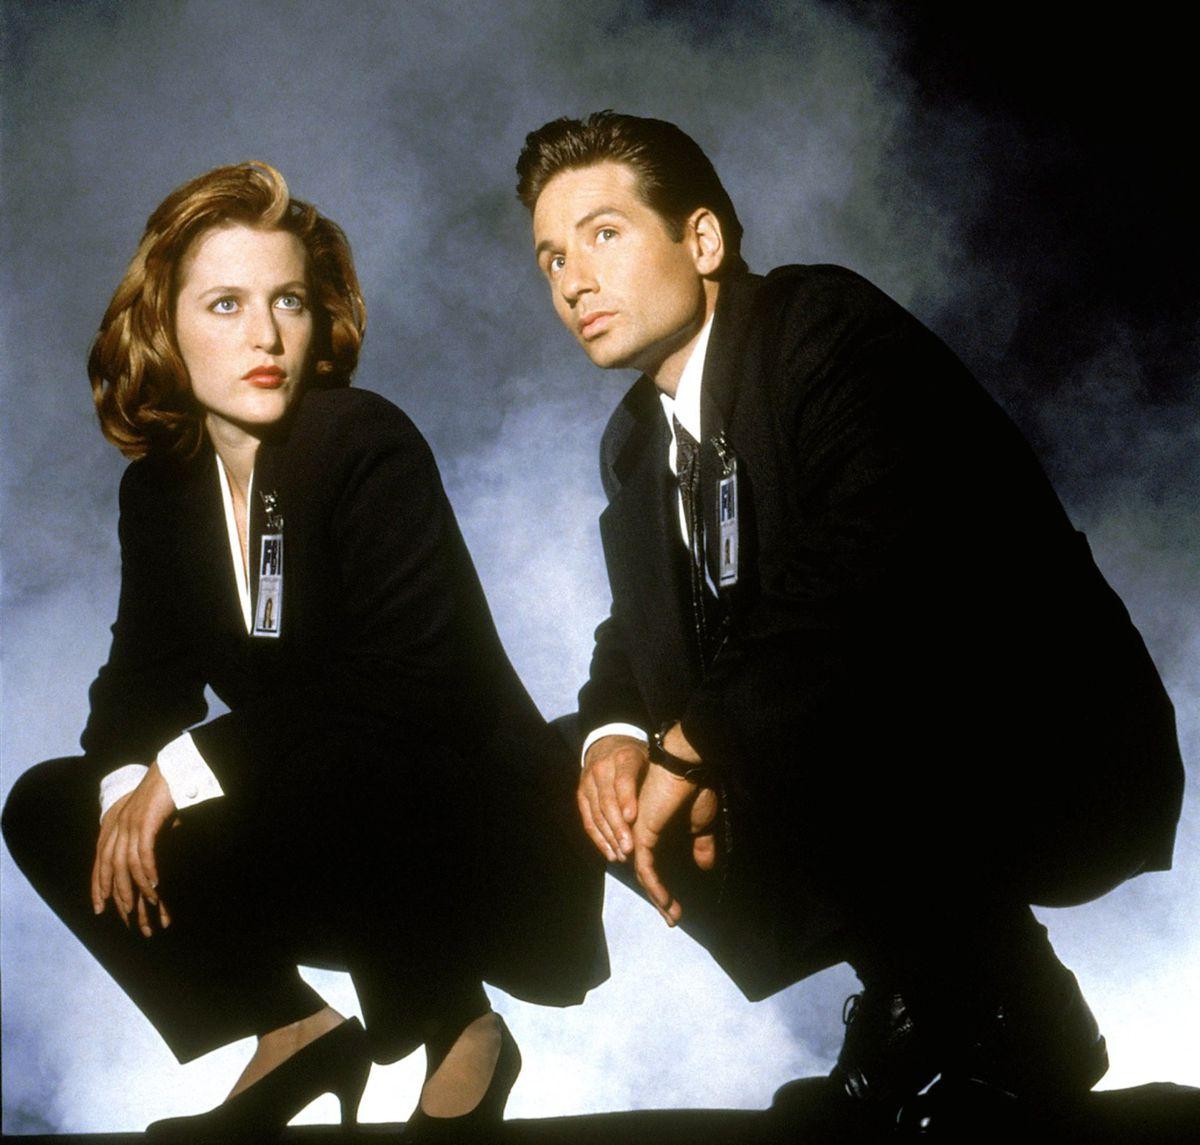 This is what Fox Mulder and Dana Scully look like in 2015